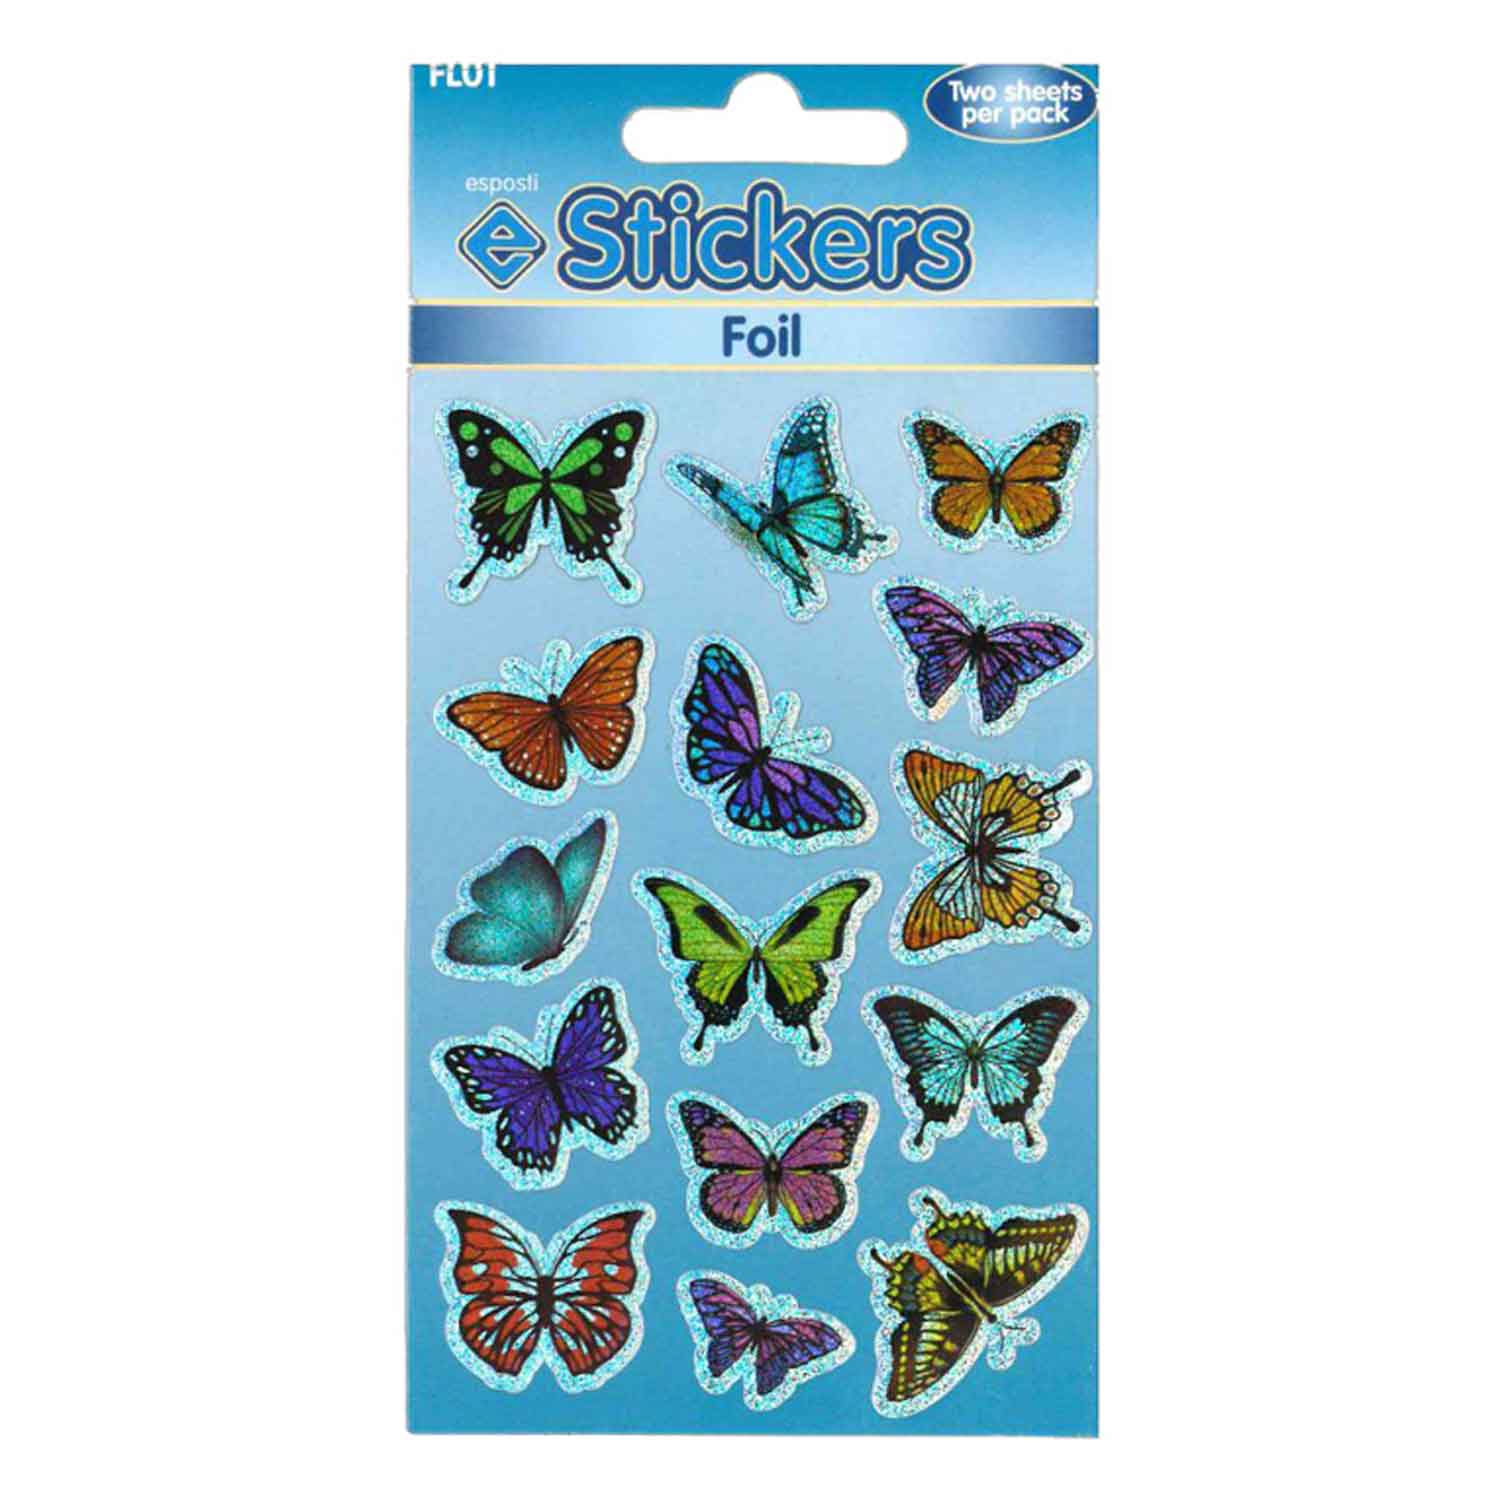 Butterflies Self Adhesive Foil Novelty Stickers - Pack of 10